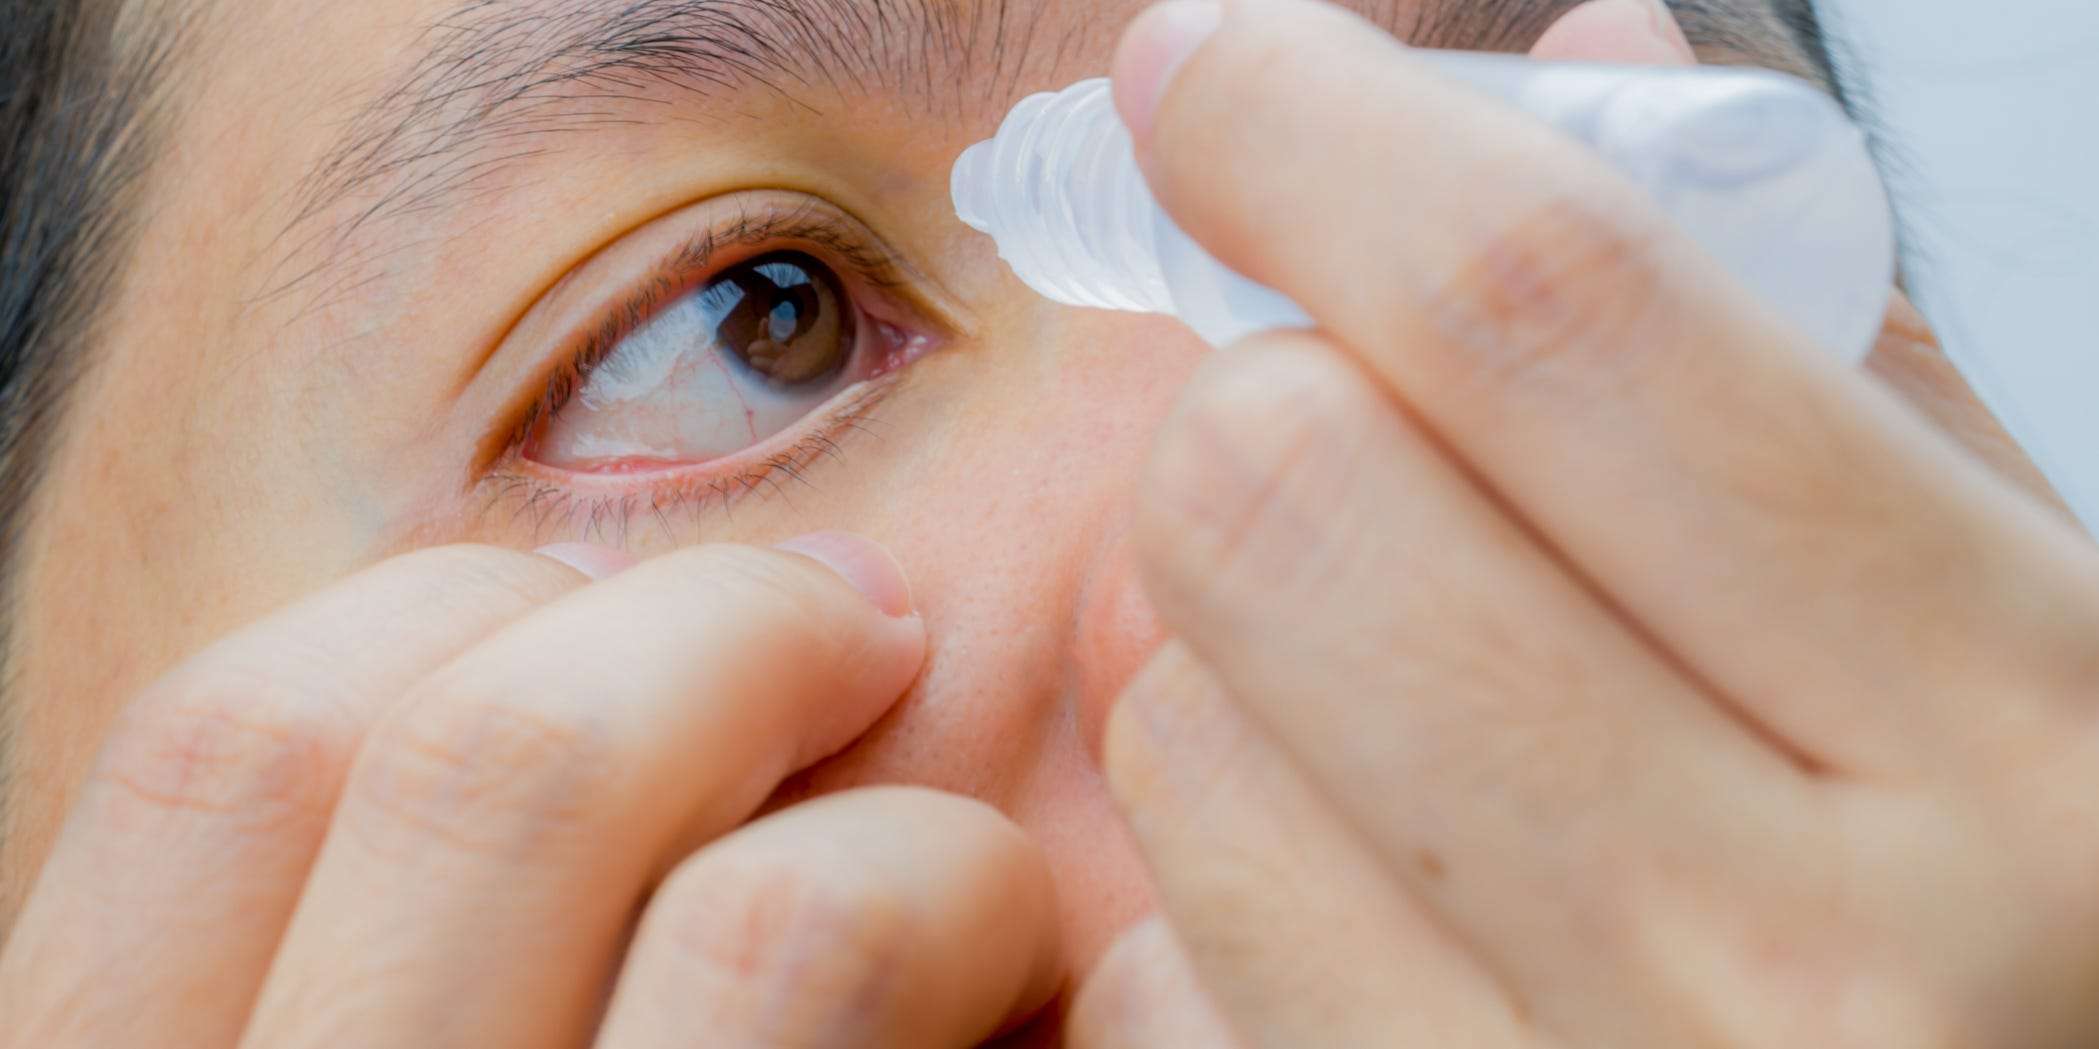 5 home remedies to treat pink eye, according to eye doctors